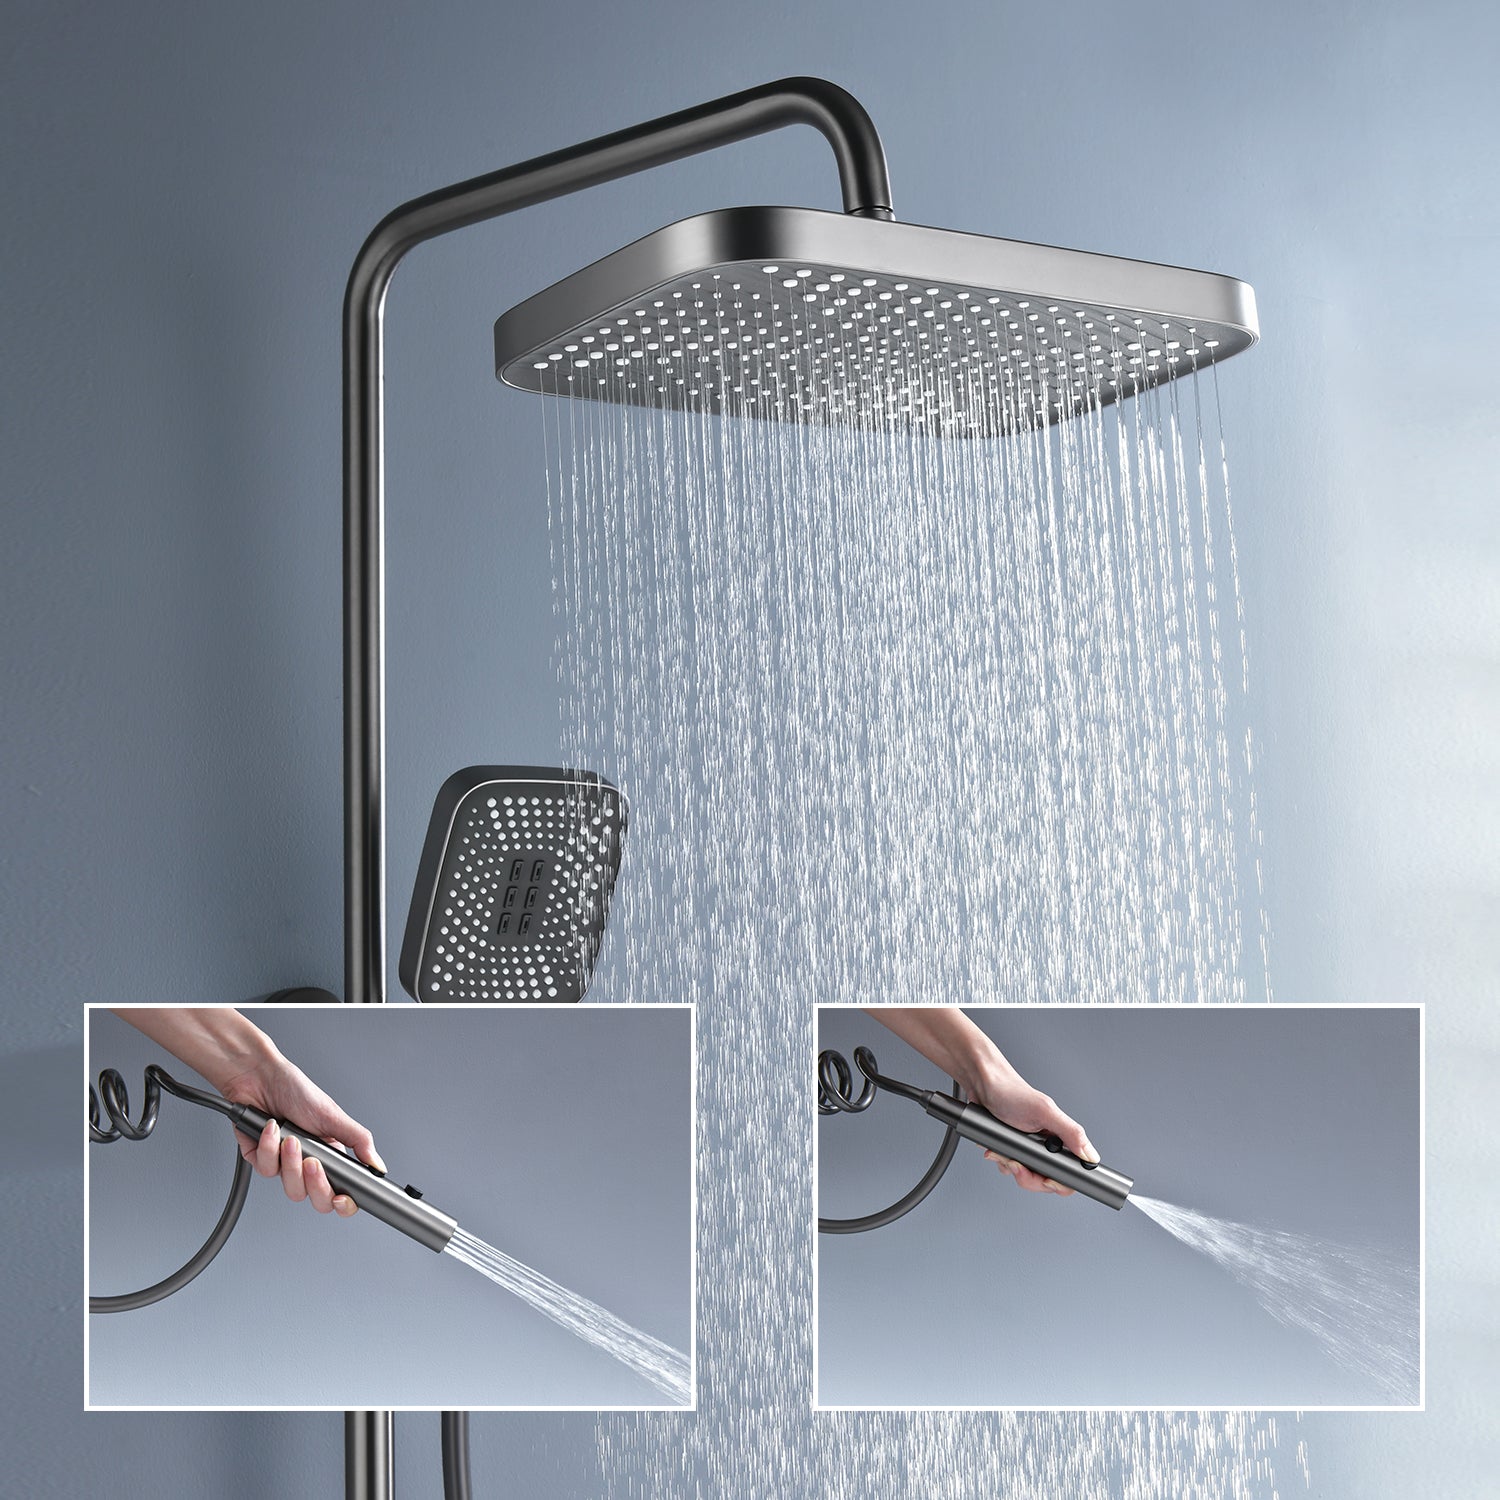 Lefton Thermostatic Shower System with Temperature Display and 4 Water Outlet Modes-SST2202